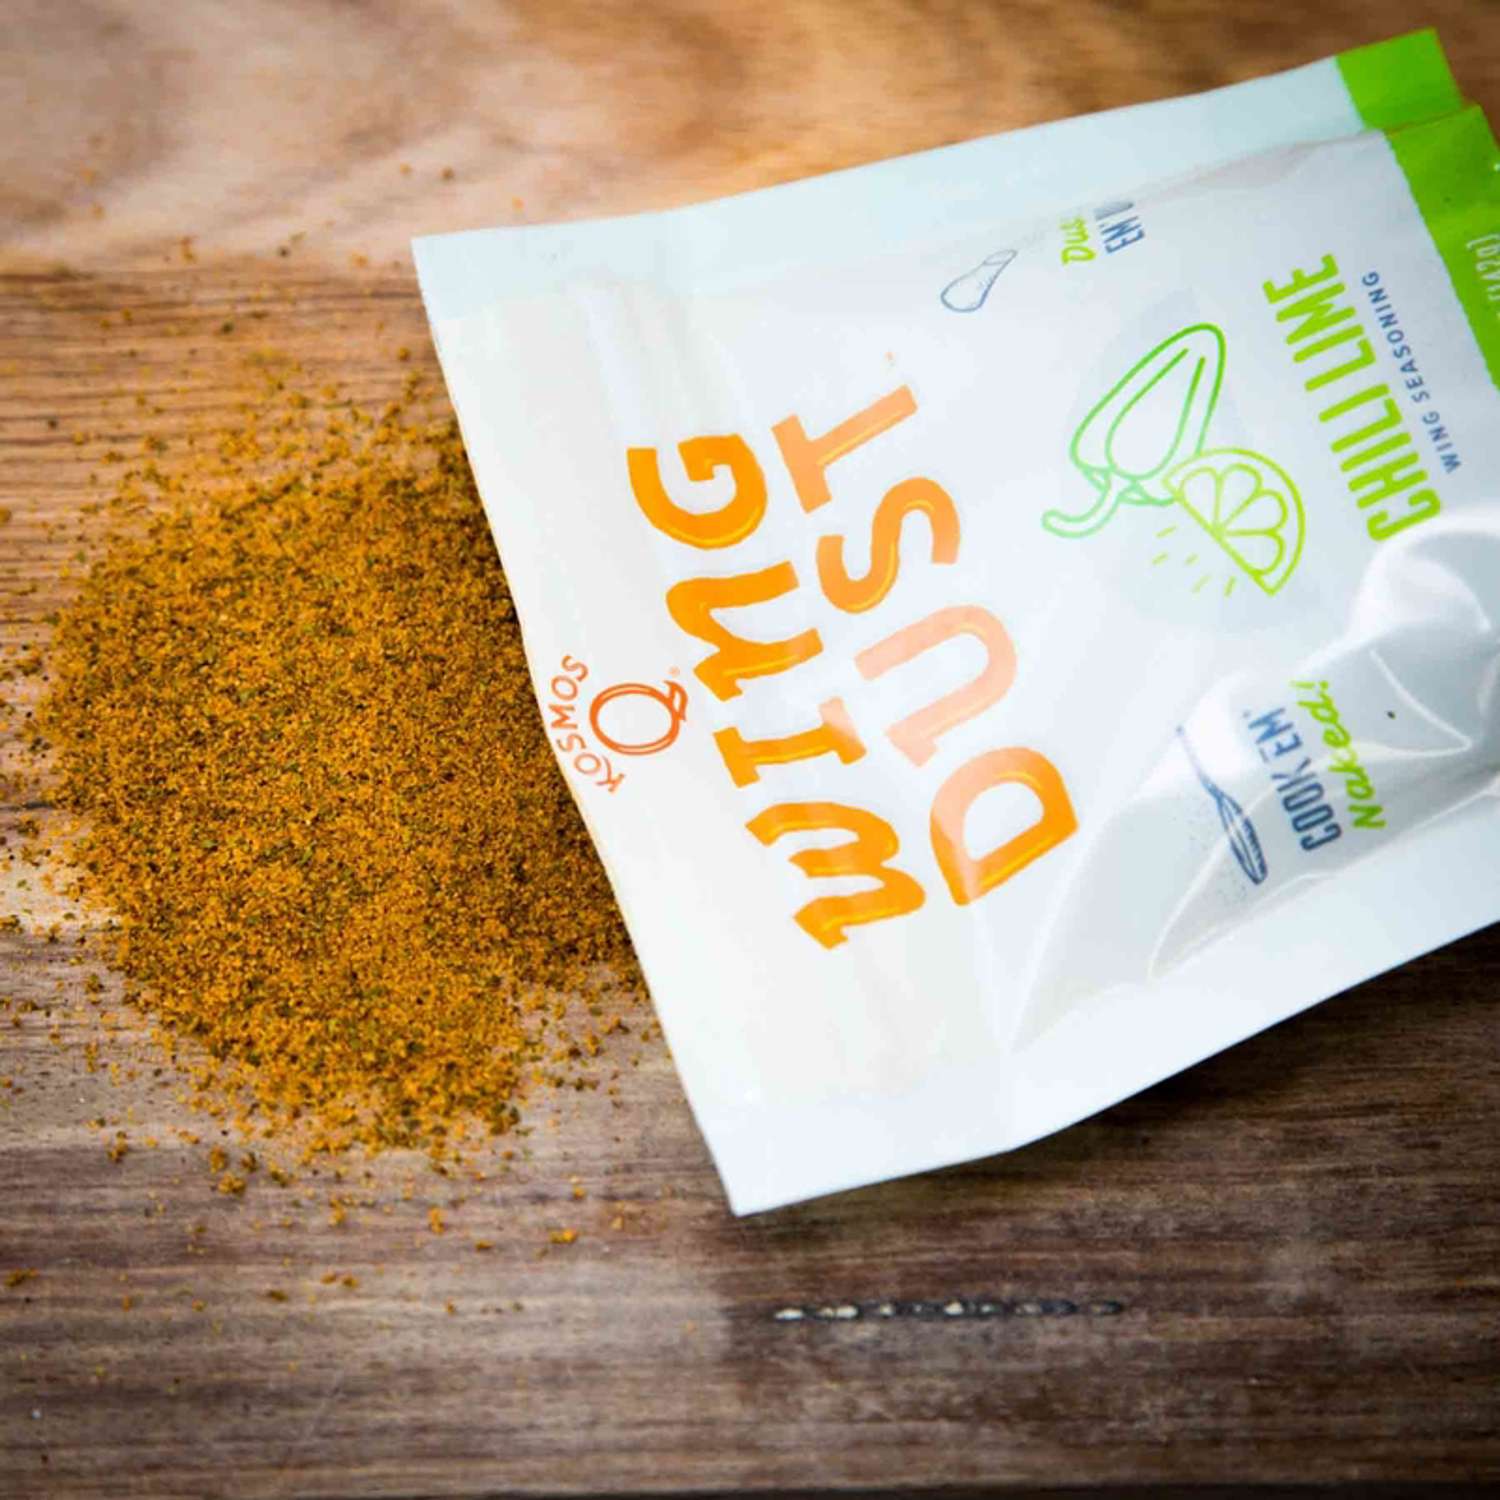 Chili Lime Wing Seasoning - Delicious, Sauceless Flavor